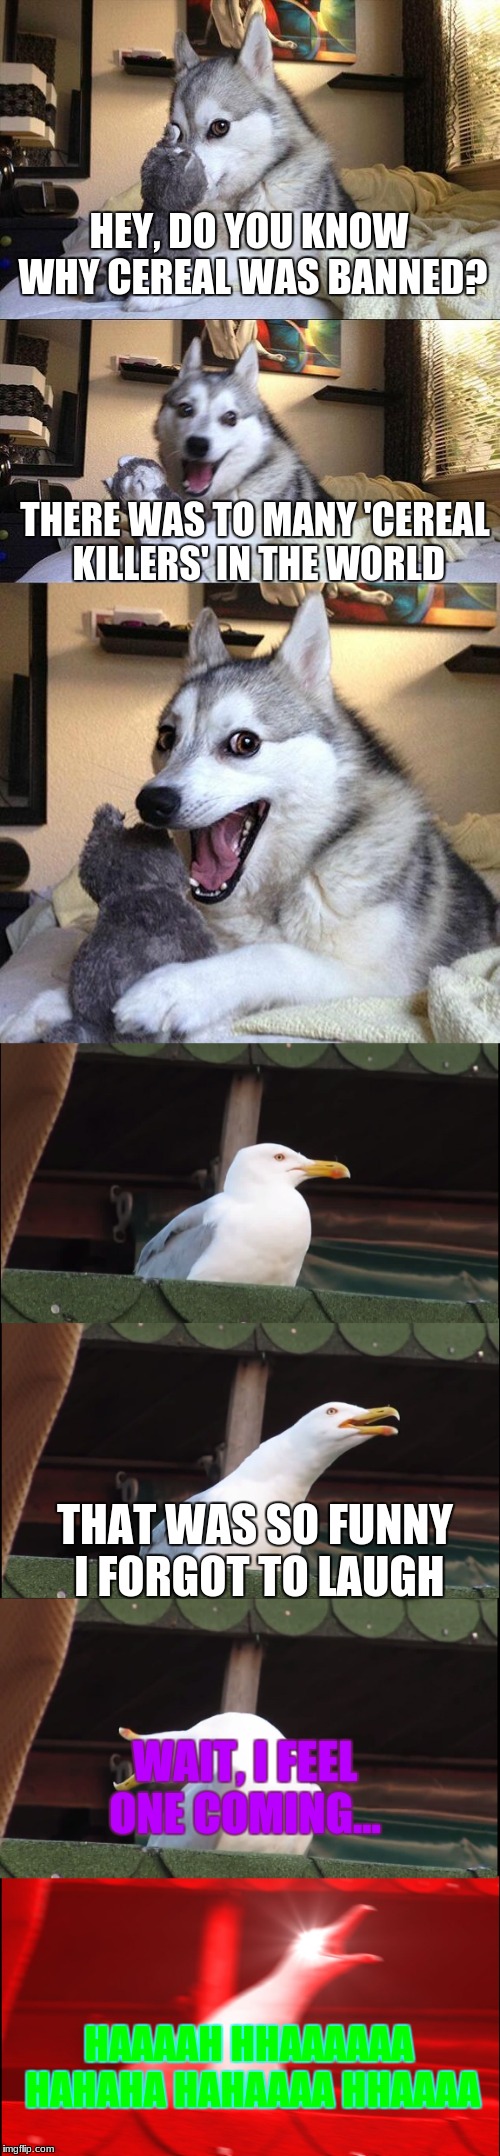 'Cereal' Killers  | HEY, DO YOU KNOW WHY CEREAL WAS BANNED? THERE WAS TO MANY 'CEREAL KILLERS' IN THE WORLD; THAT WAS SO FUNNY I FORGOT TO LAUGH; WAIT, I FEEL ONE COMING... HAAAAH HHAAAAAA HAHAHA HAHAAAA HHAAAA | image tagged in memes,funny,bad pun dog,inhaling seagull | made w/ Imgflip meme maker